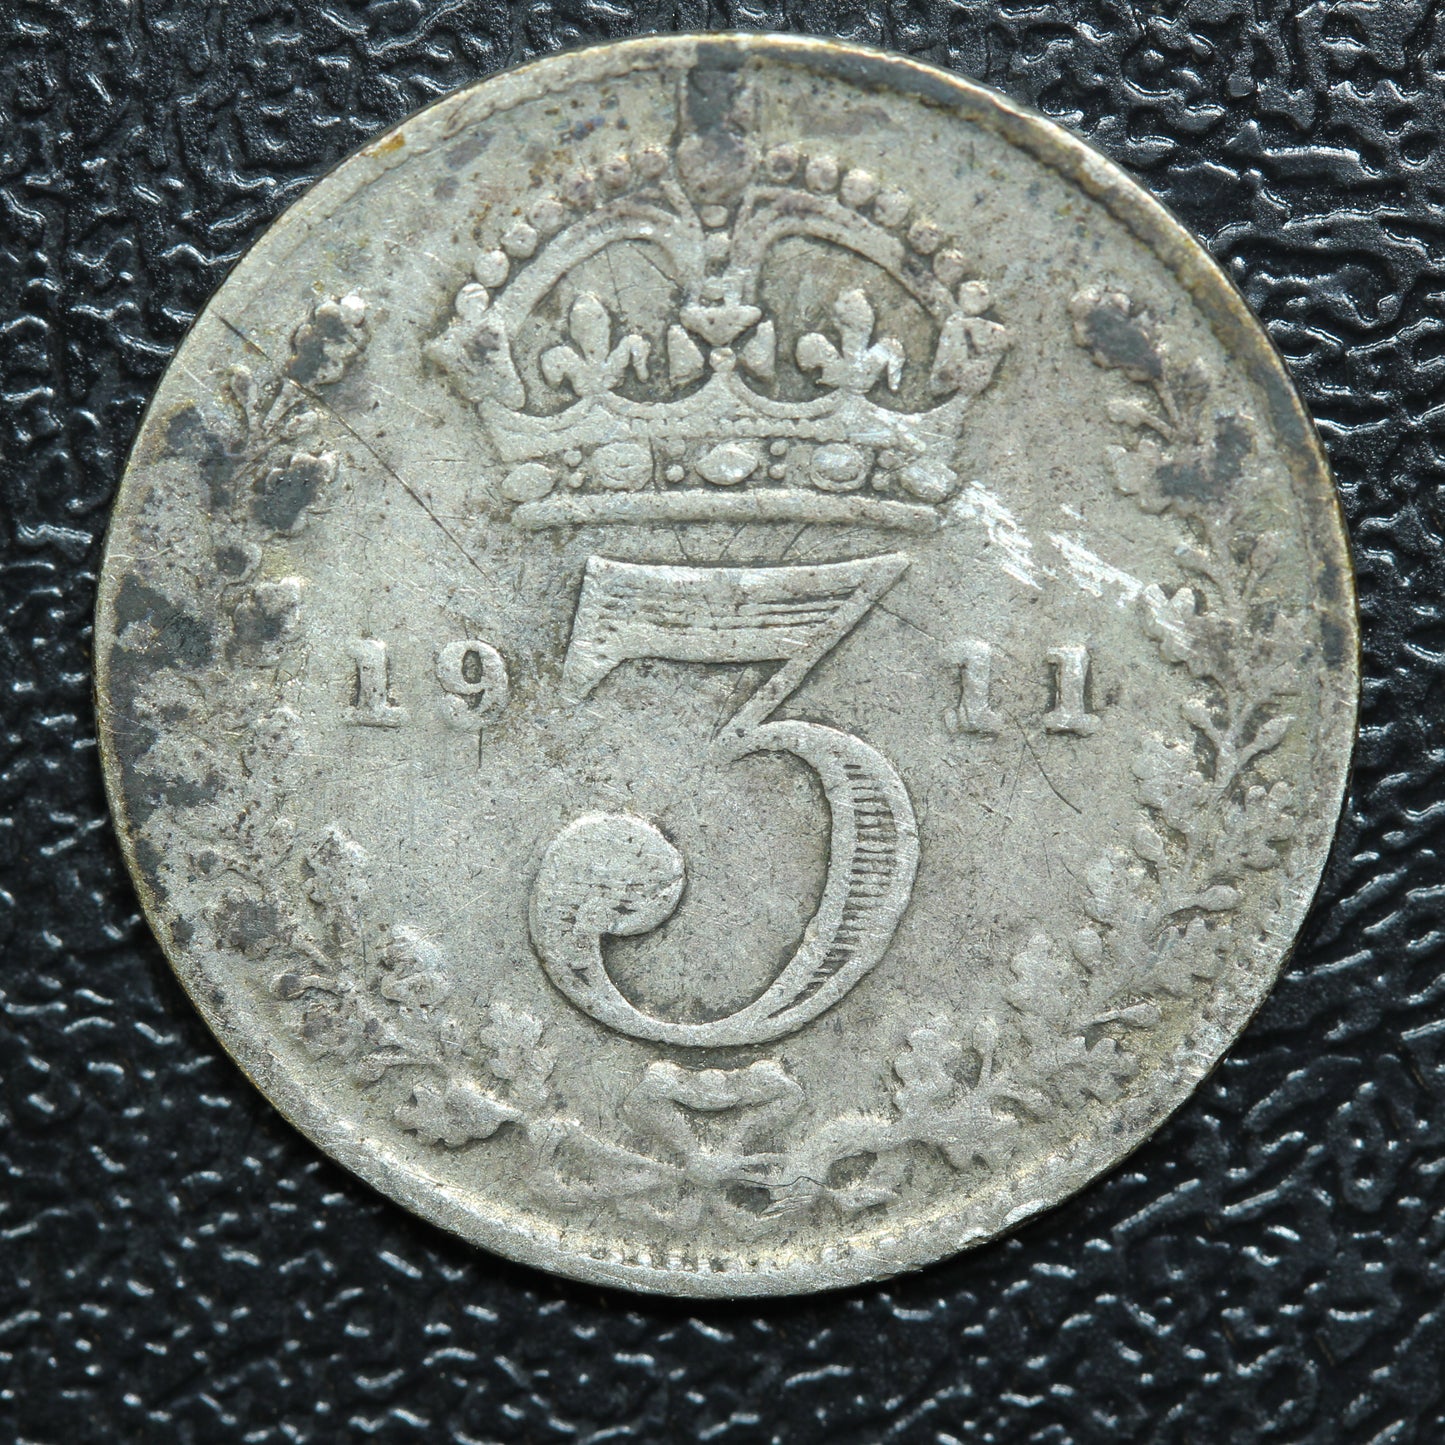 1911 Great Britain 3 Pence Threepence Silver Coin - KM# 813